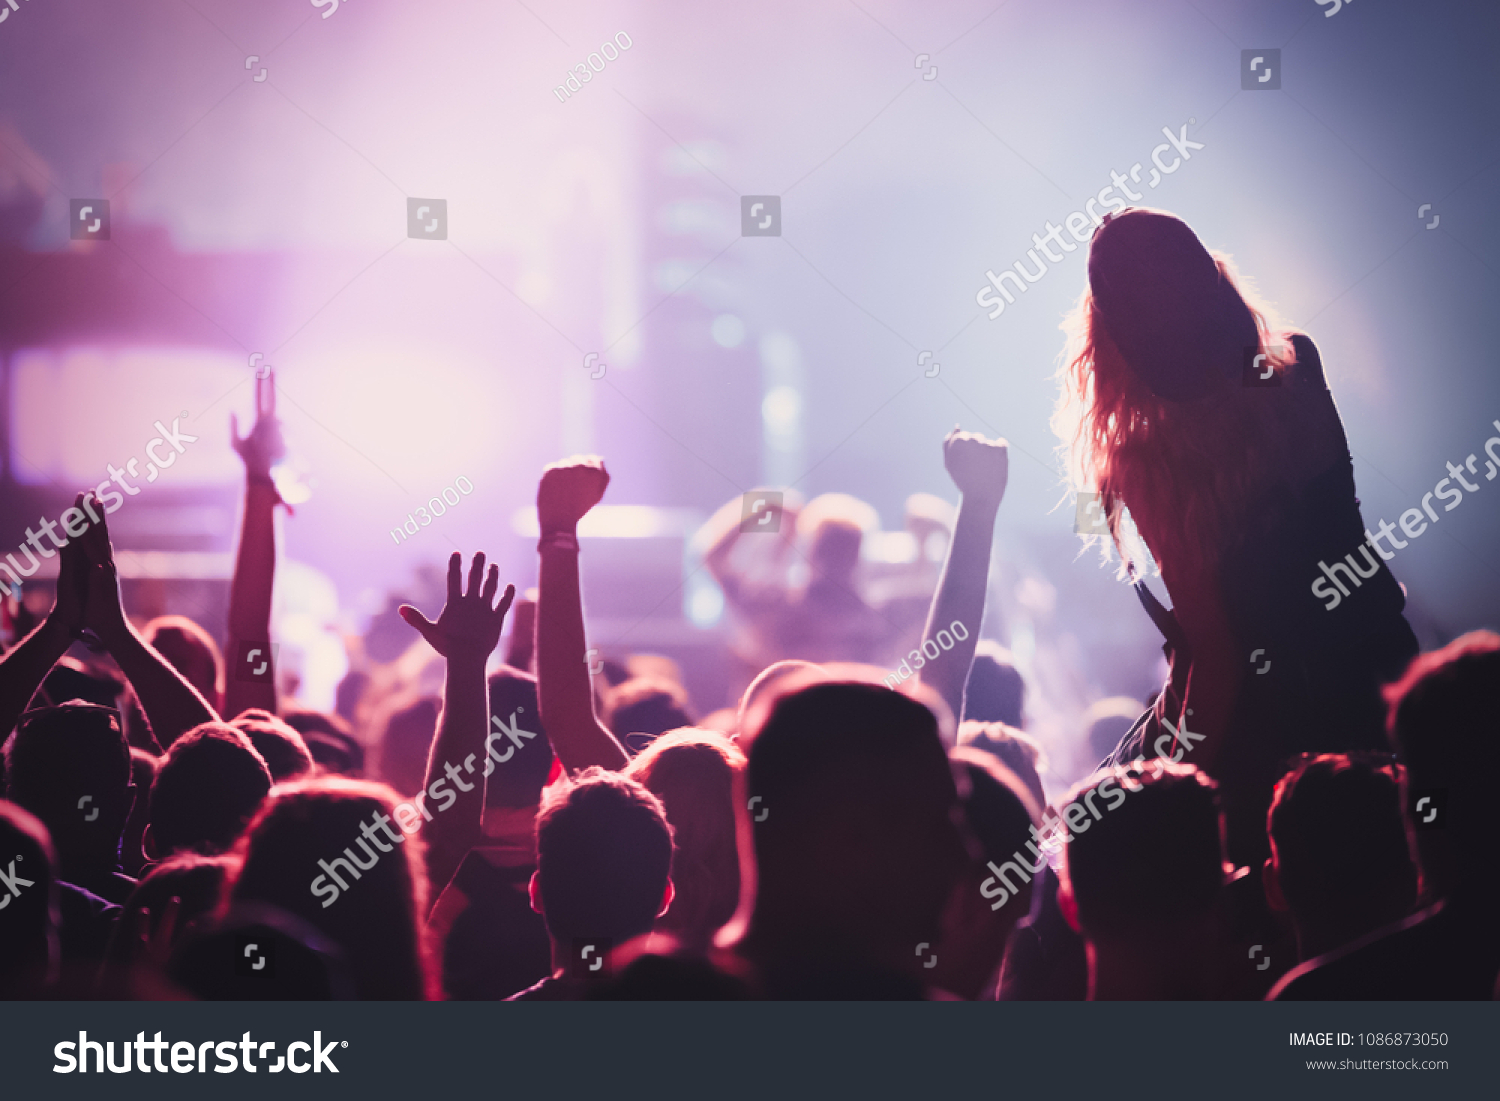 Picture of dancing crowd at music festival #1086873050